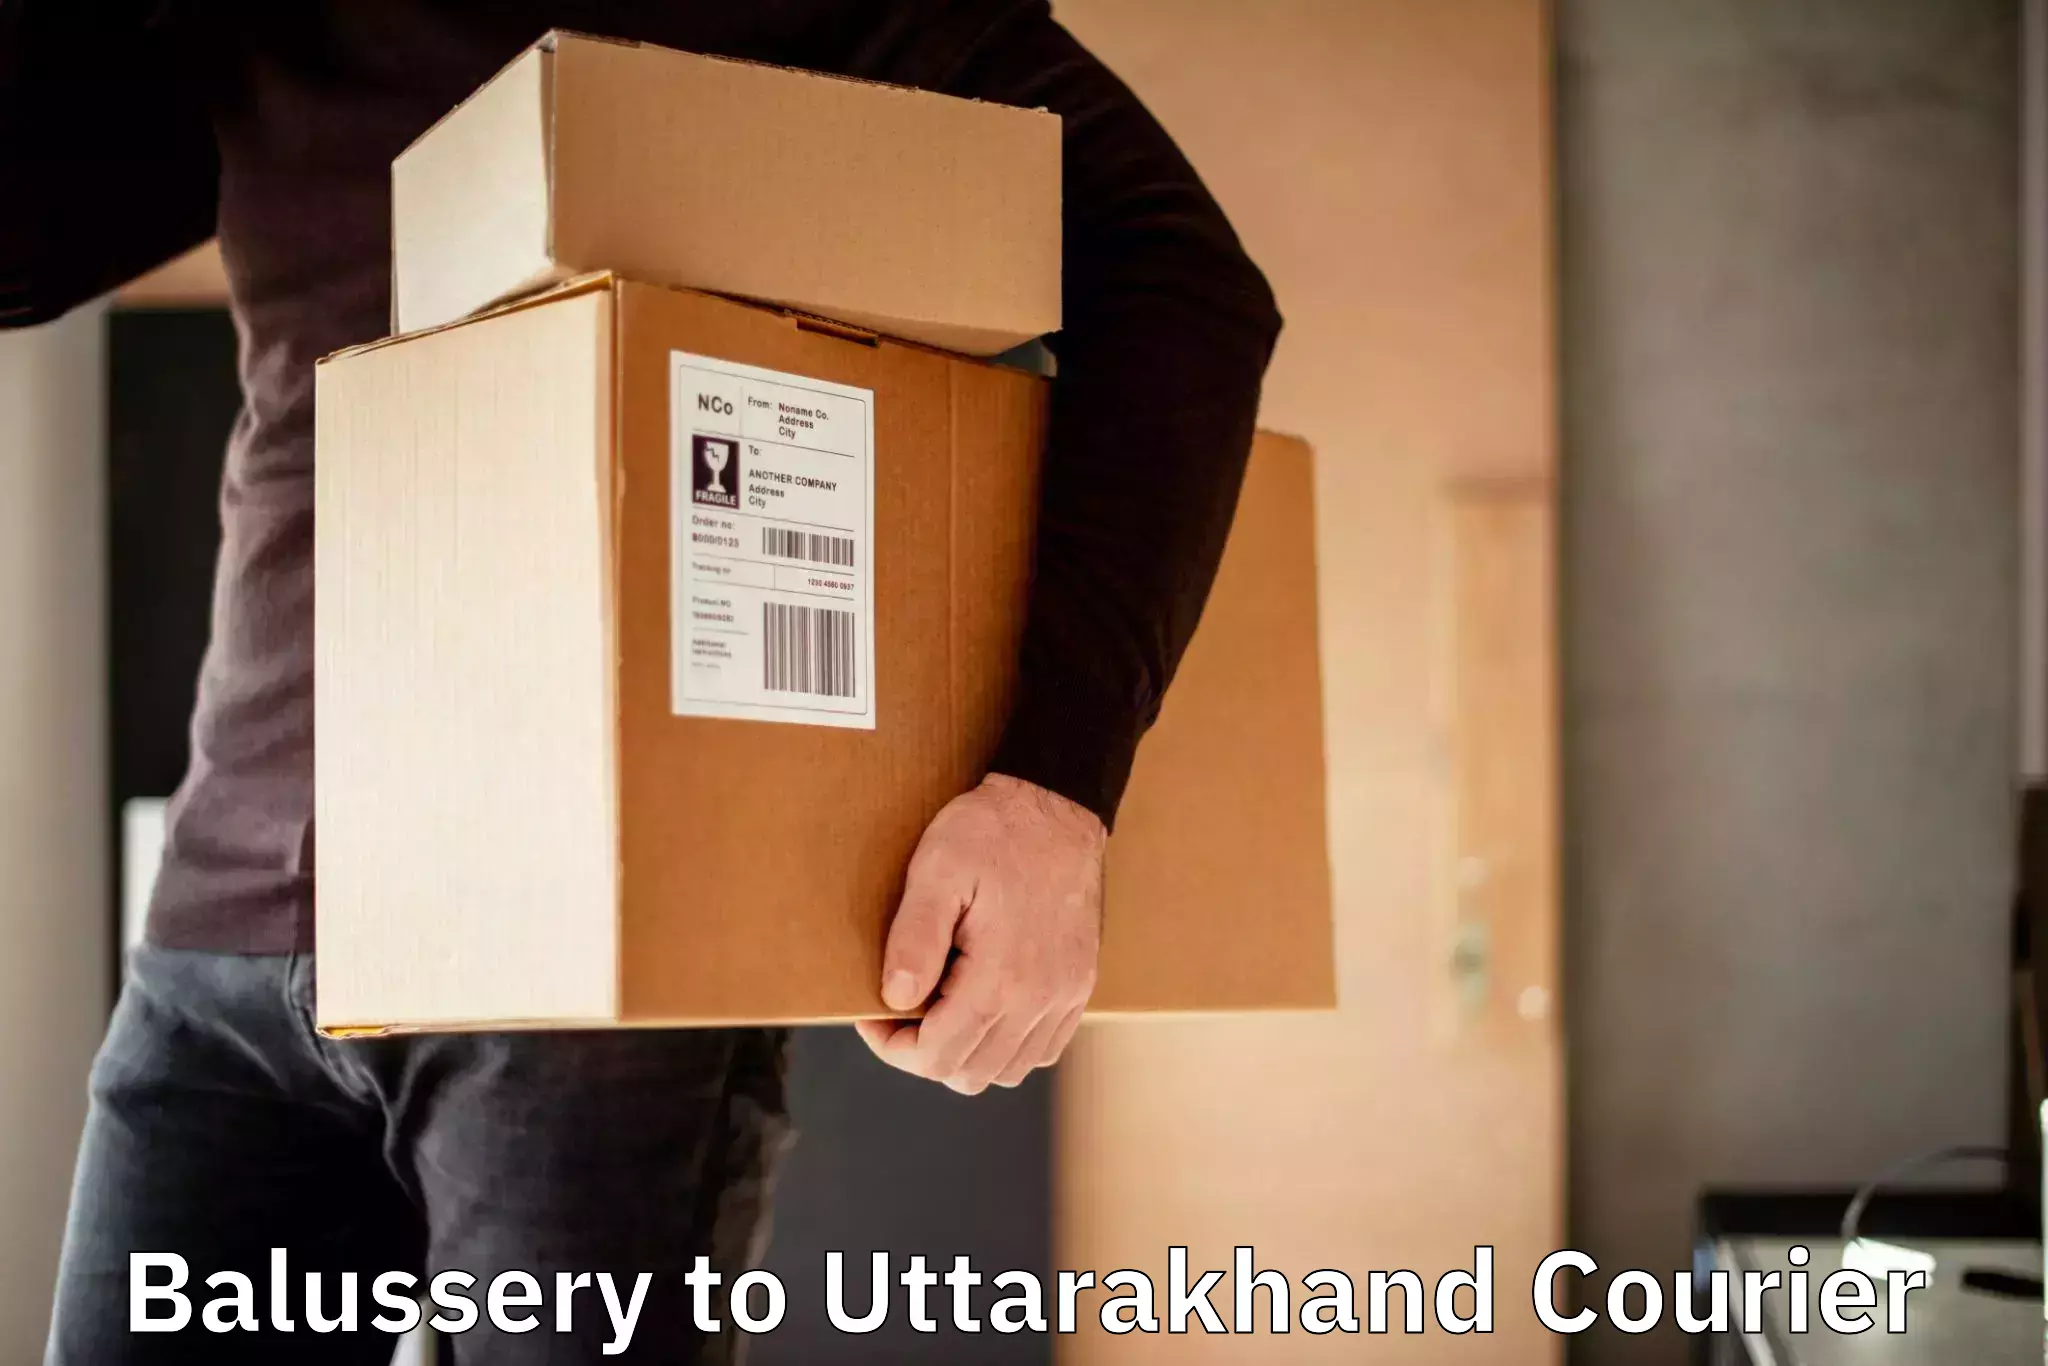 Courier service innovation Balussery to Mussoorie